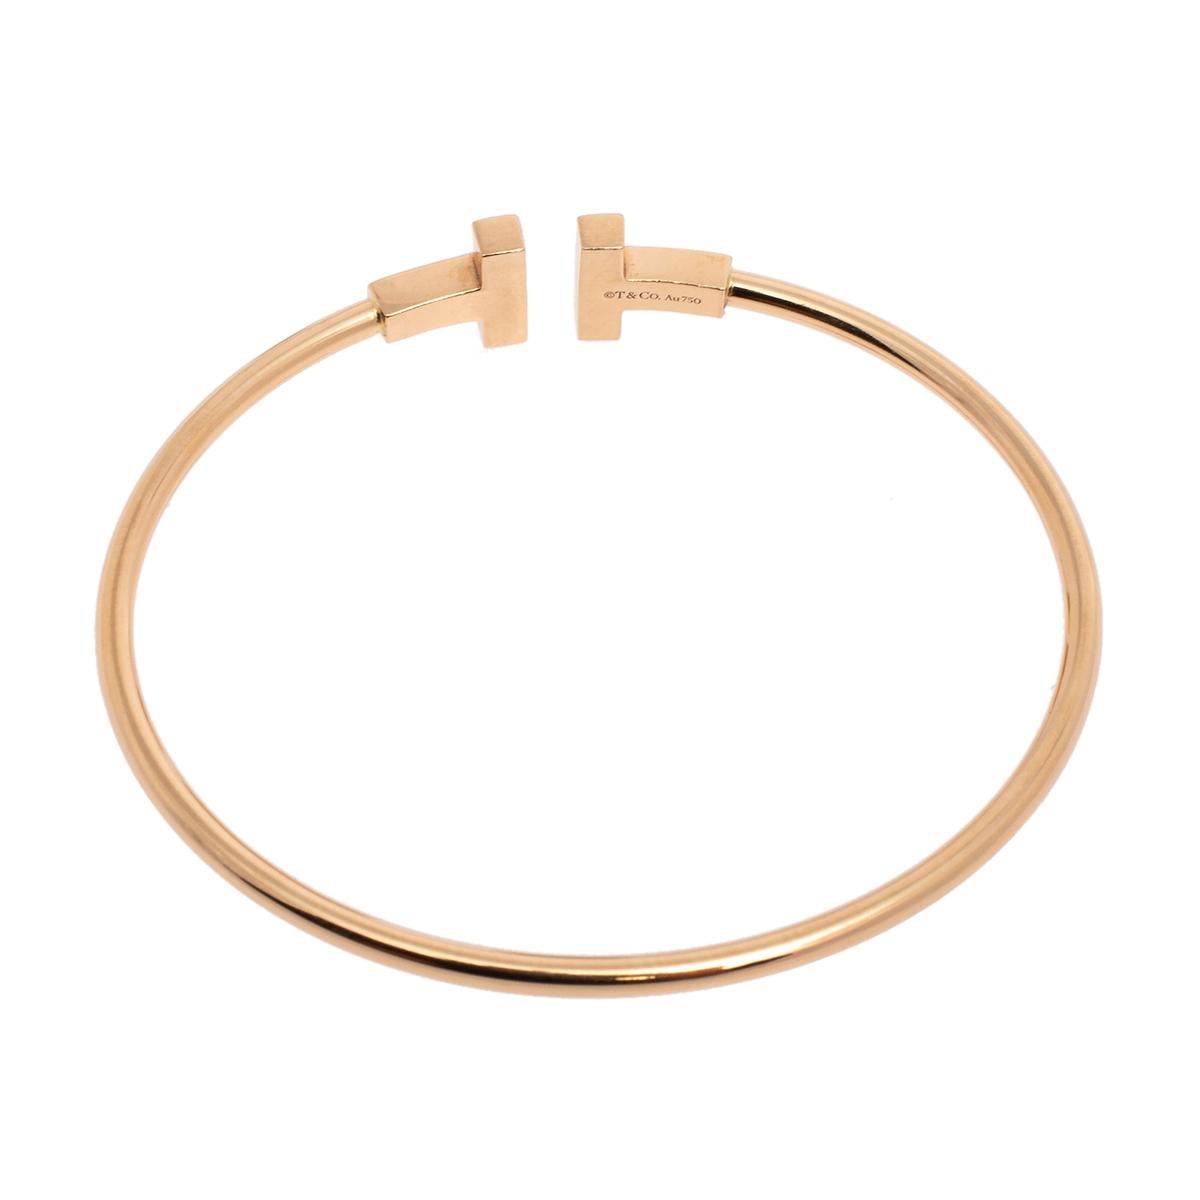 The Tiffany T collection by Tiffany & Co. has been inspired by the city of New York. Each piece comes with a distinct shape that boasts of fabulous style and structure. This T Wire bracelet is crafted from 18K rose gold and styled as a wire-like